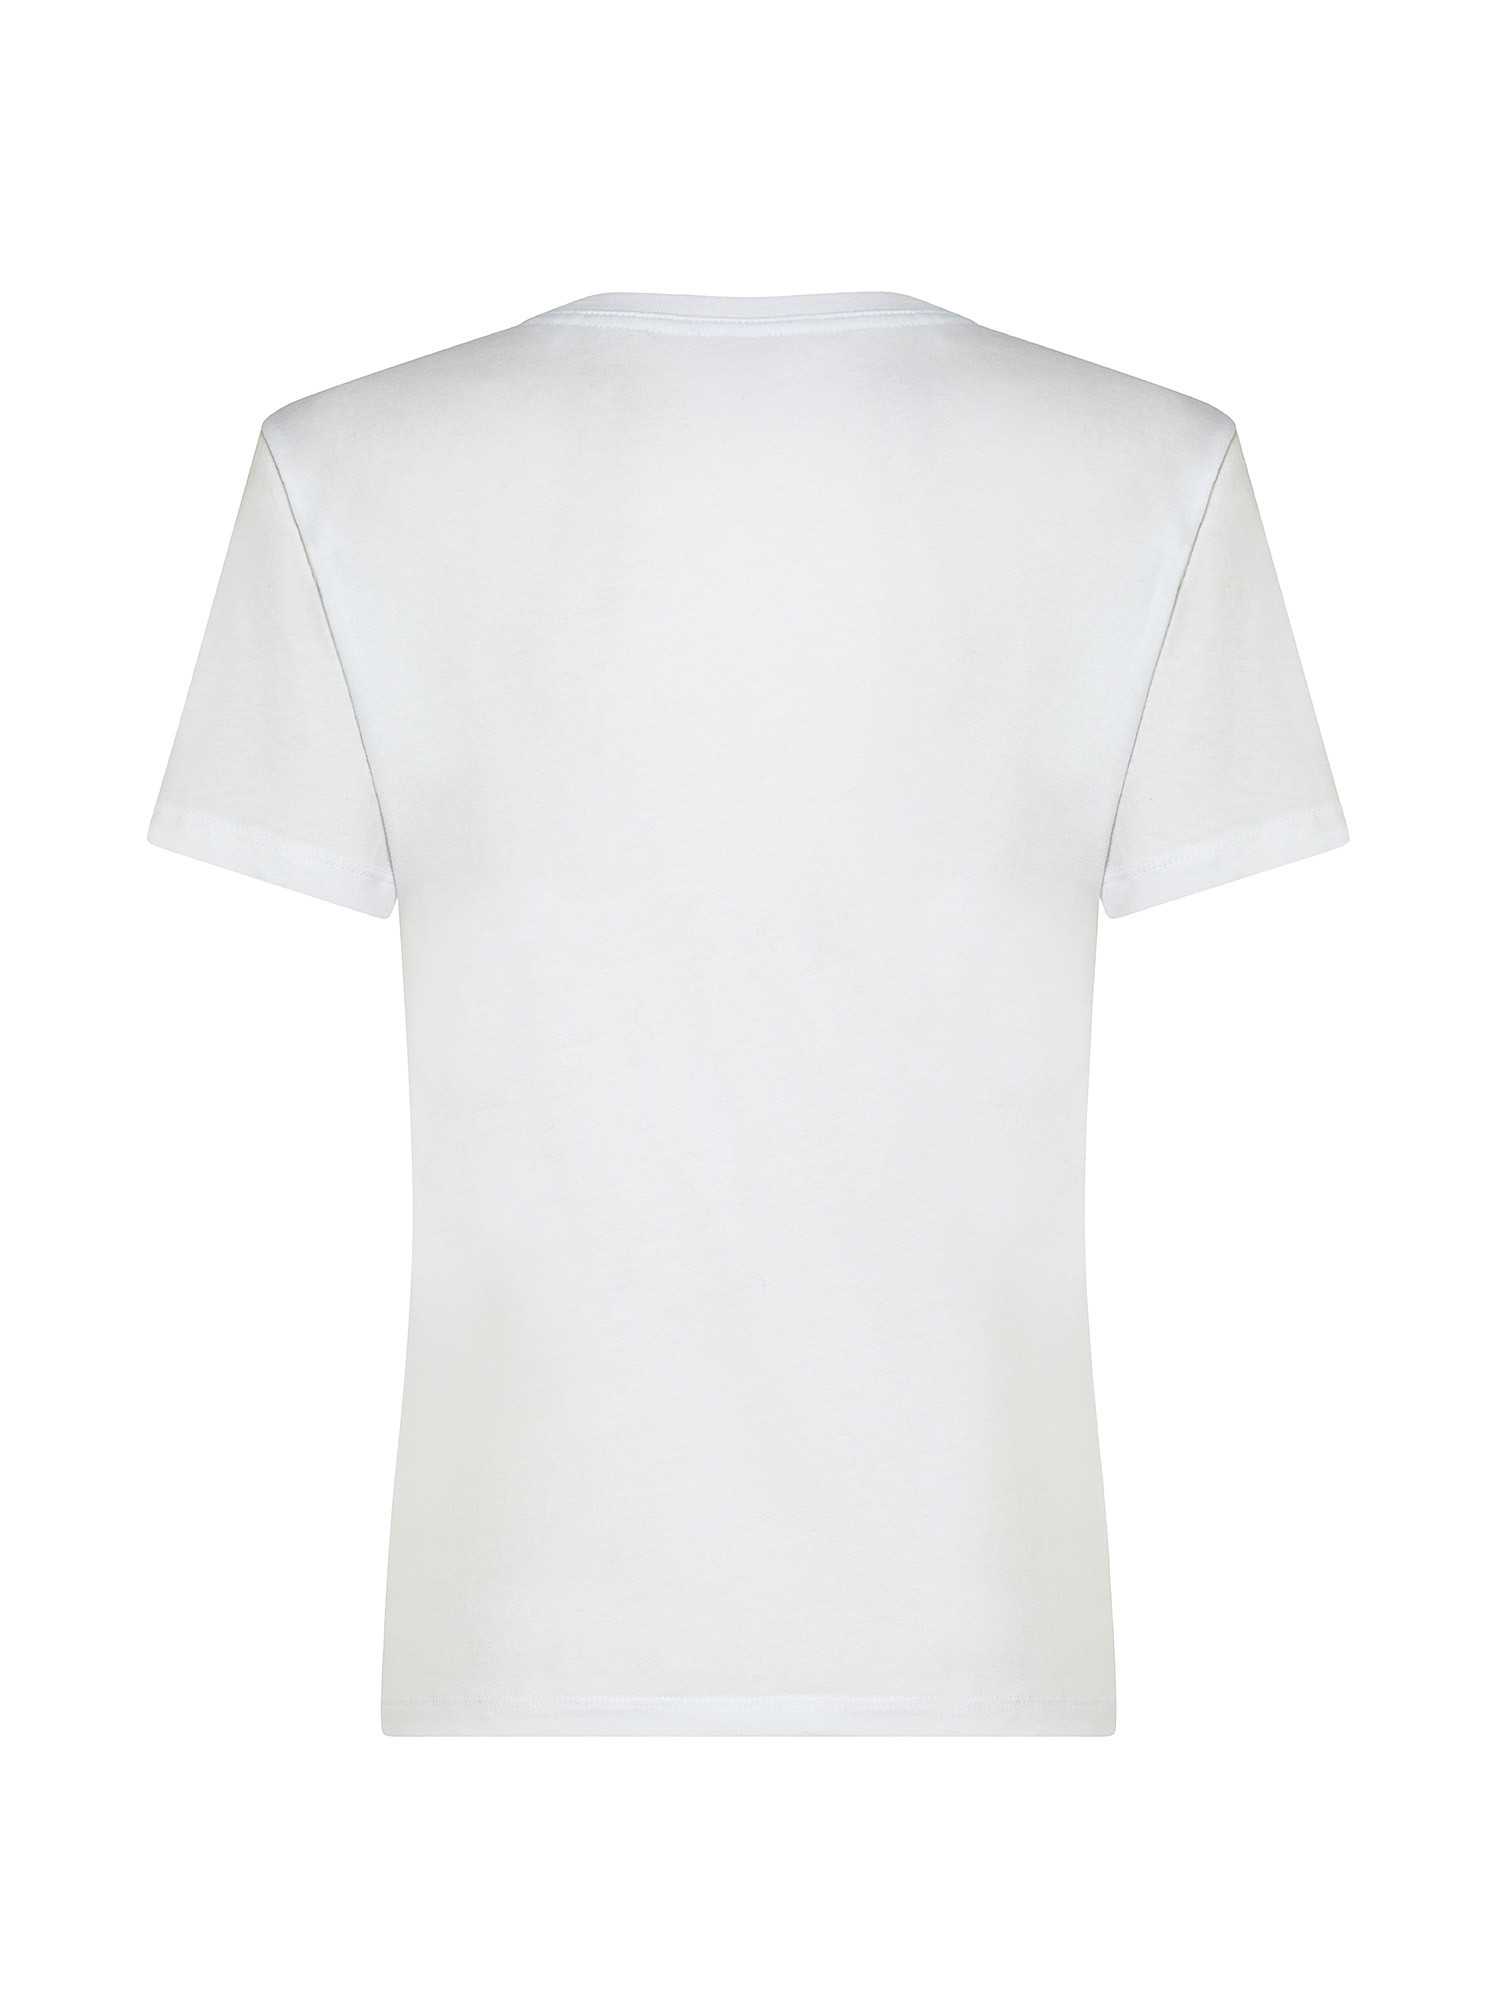 Poppy T-shirt with print, White, large image number 1